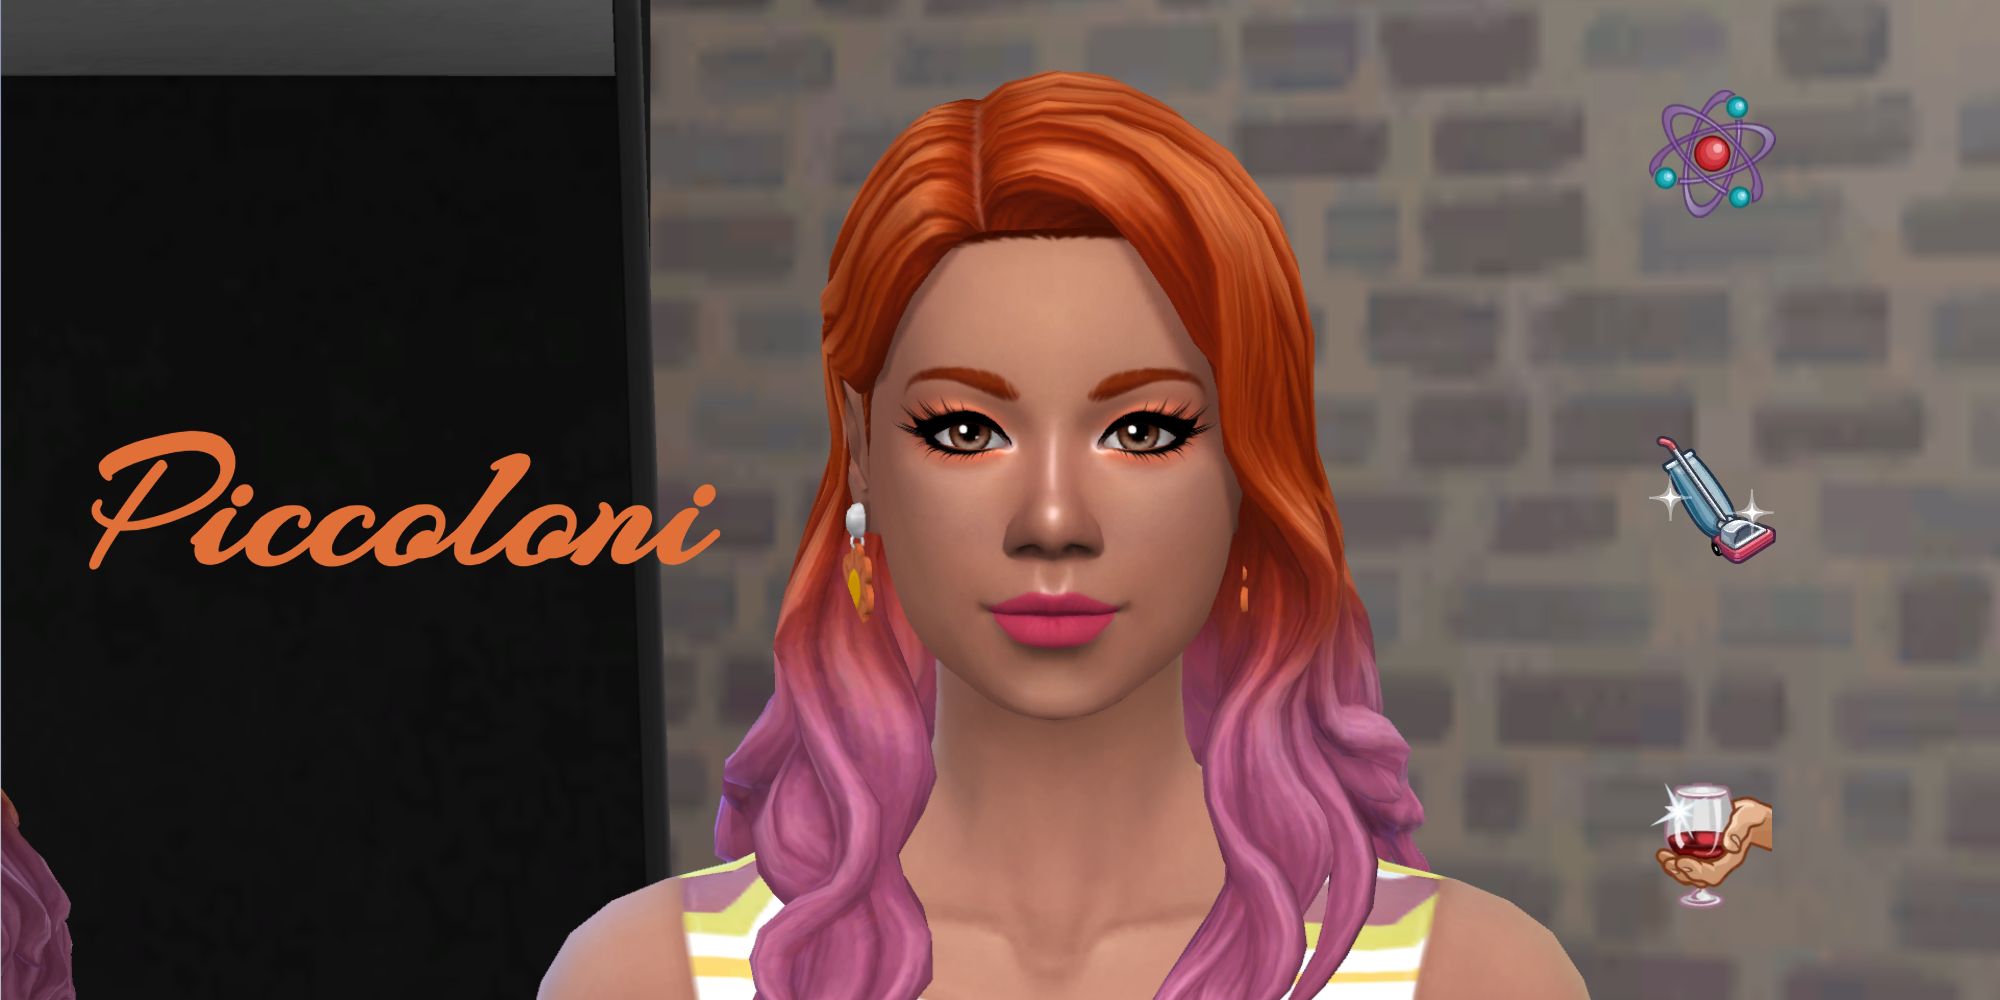 A orange and pink-haired Sim from the piccoloni generation